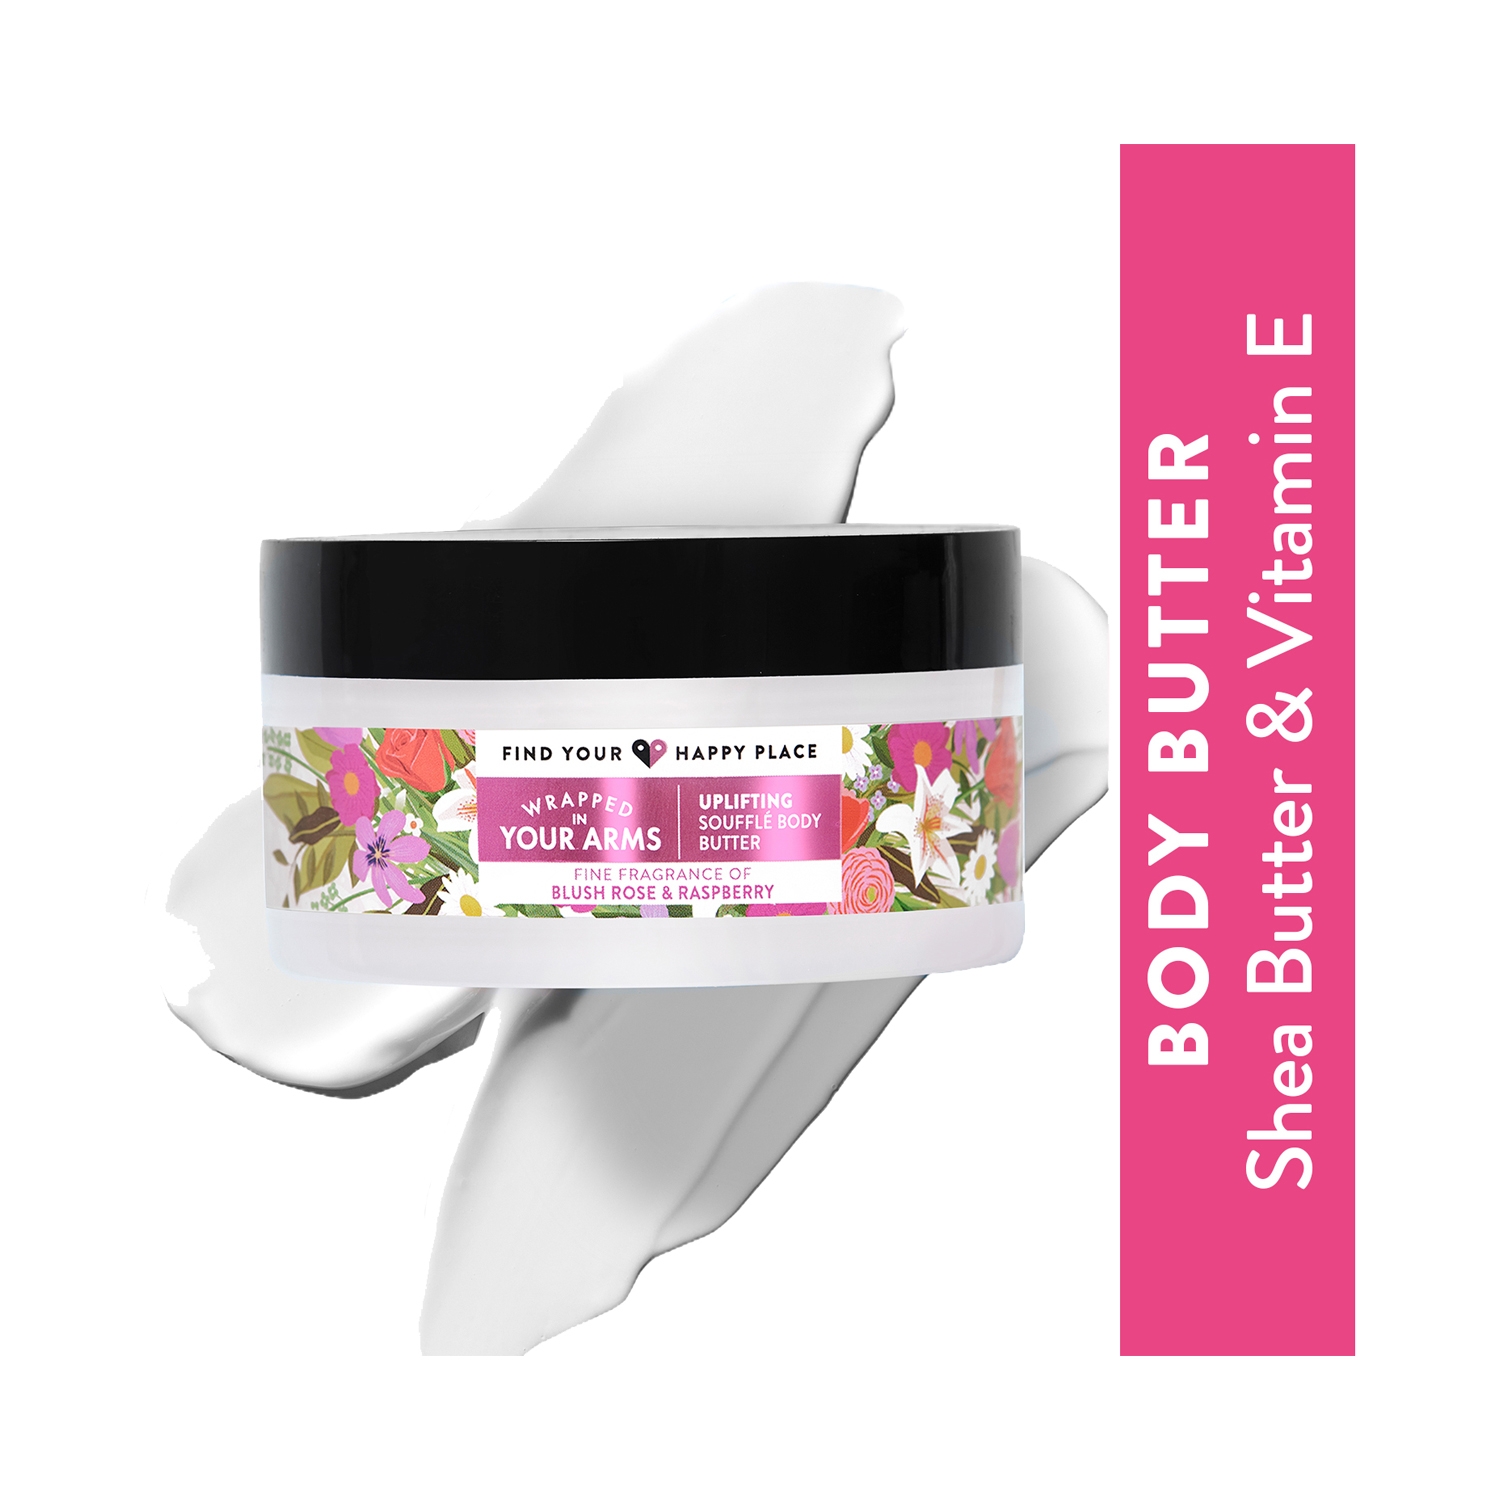 Find Your Happy Place | Find Your Happy Place Wrapped In Your Arms Souffle Body Butter (200g)